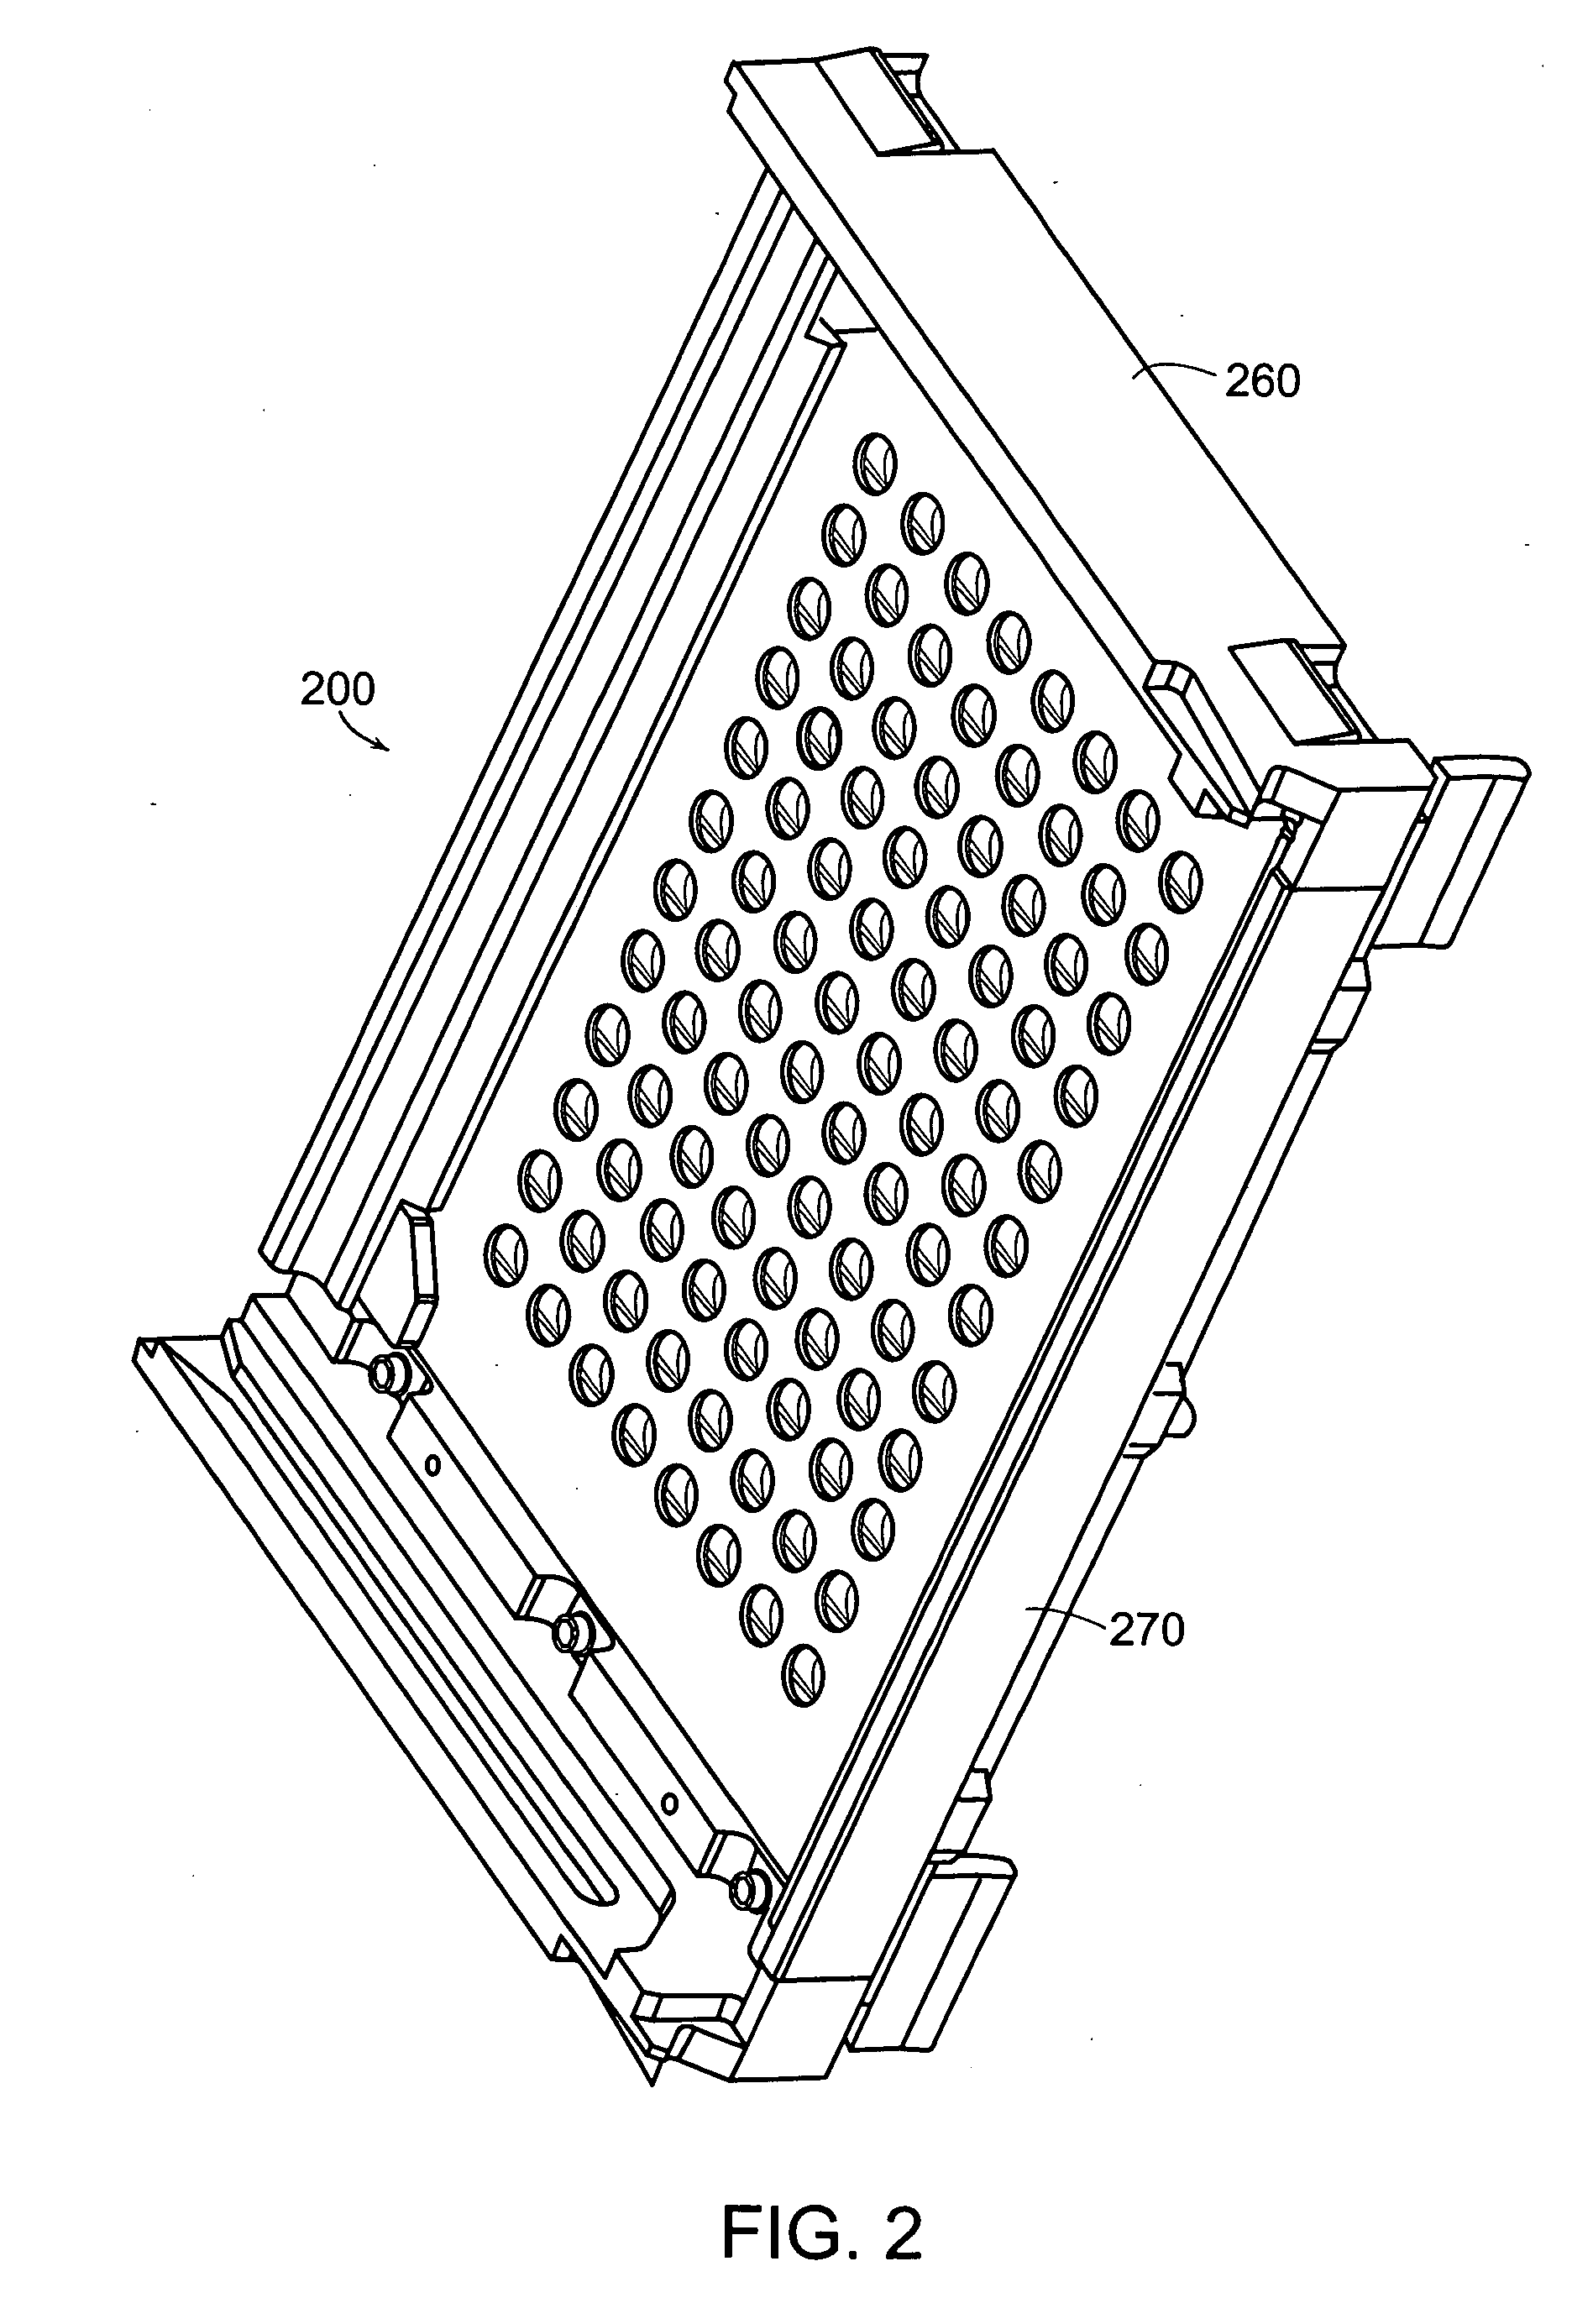 Method and apparatus for cover assembly for thermal cycling of samples